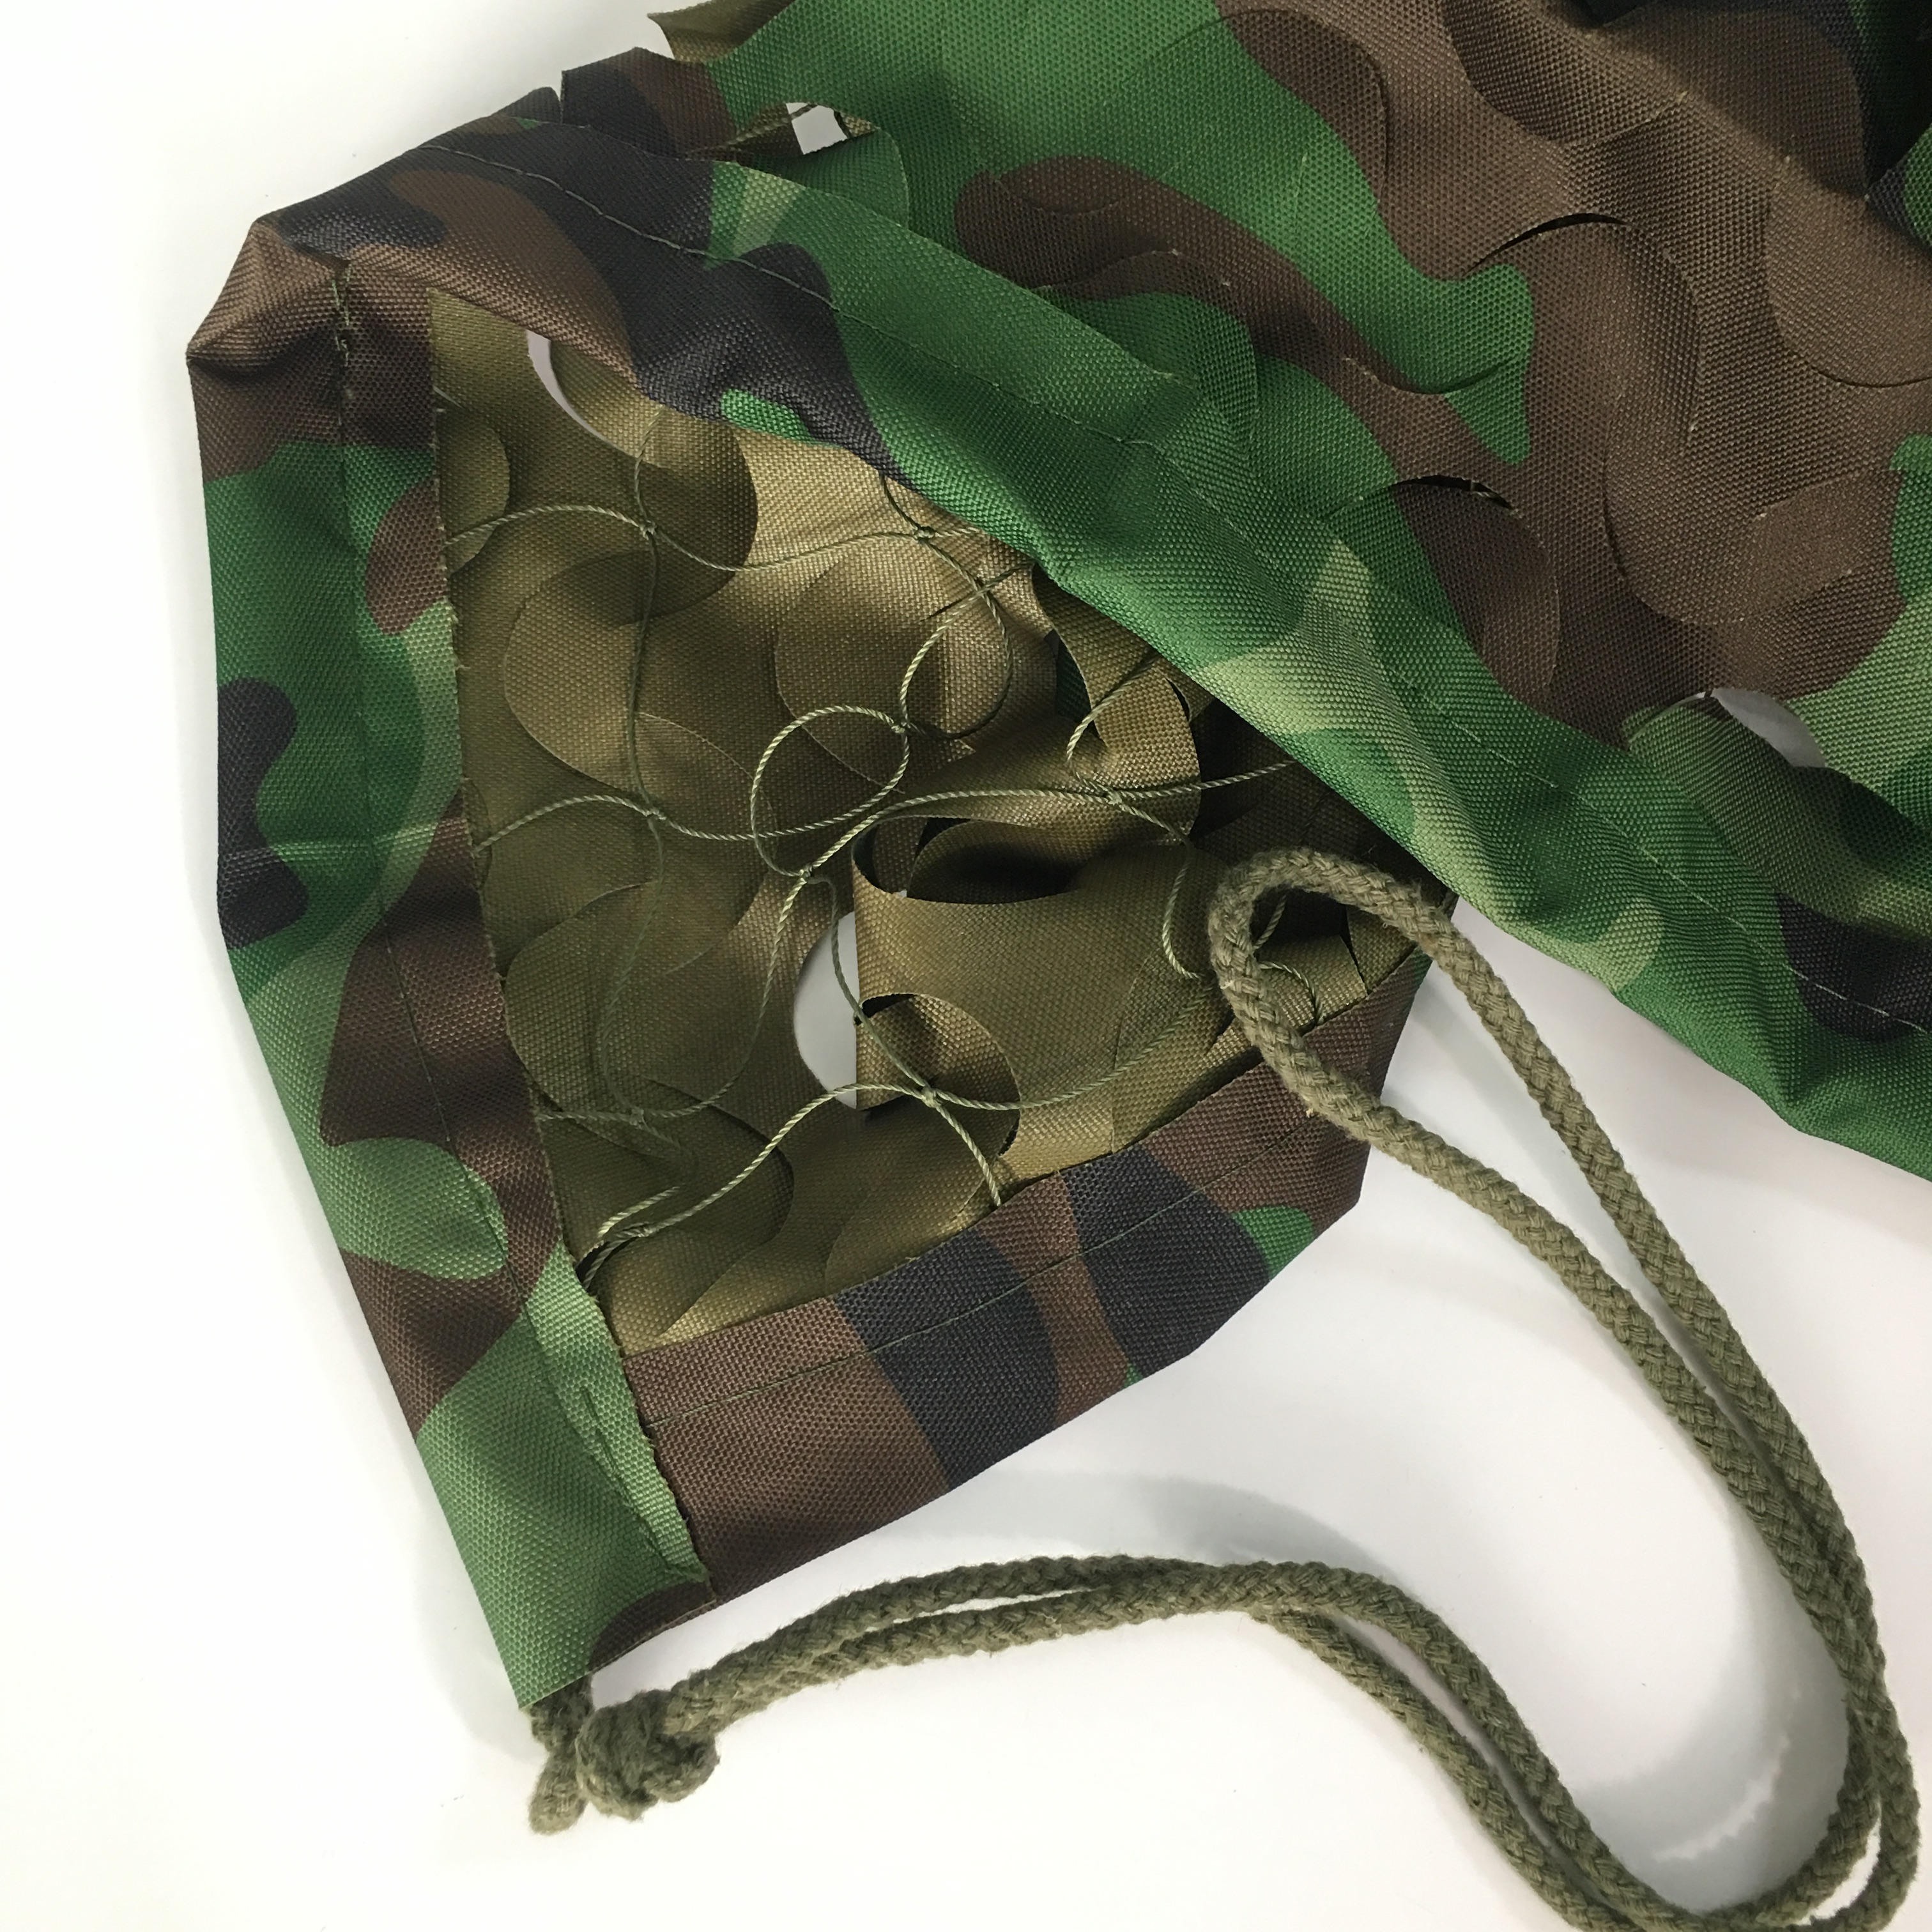 Hot sale waterproof 300D polyeserter woodland camo mesh camouflage net for military use